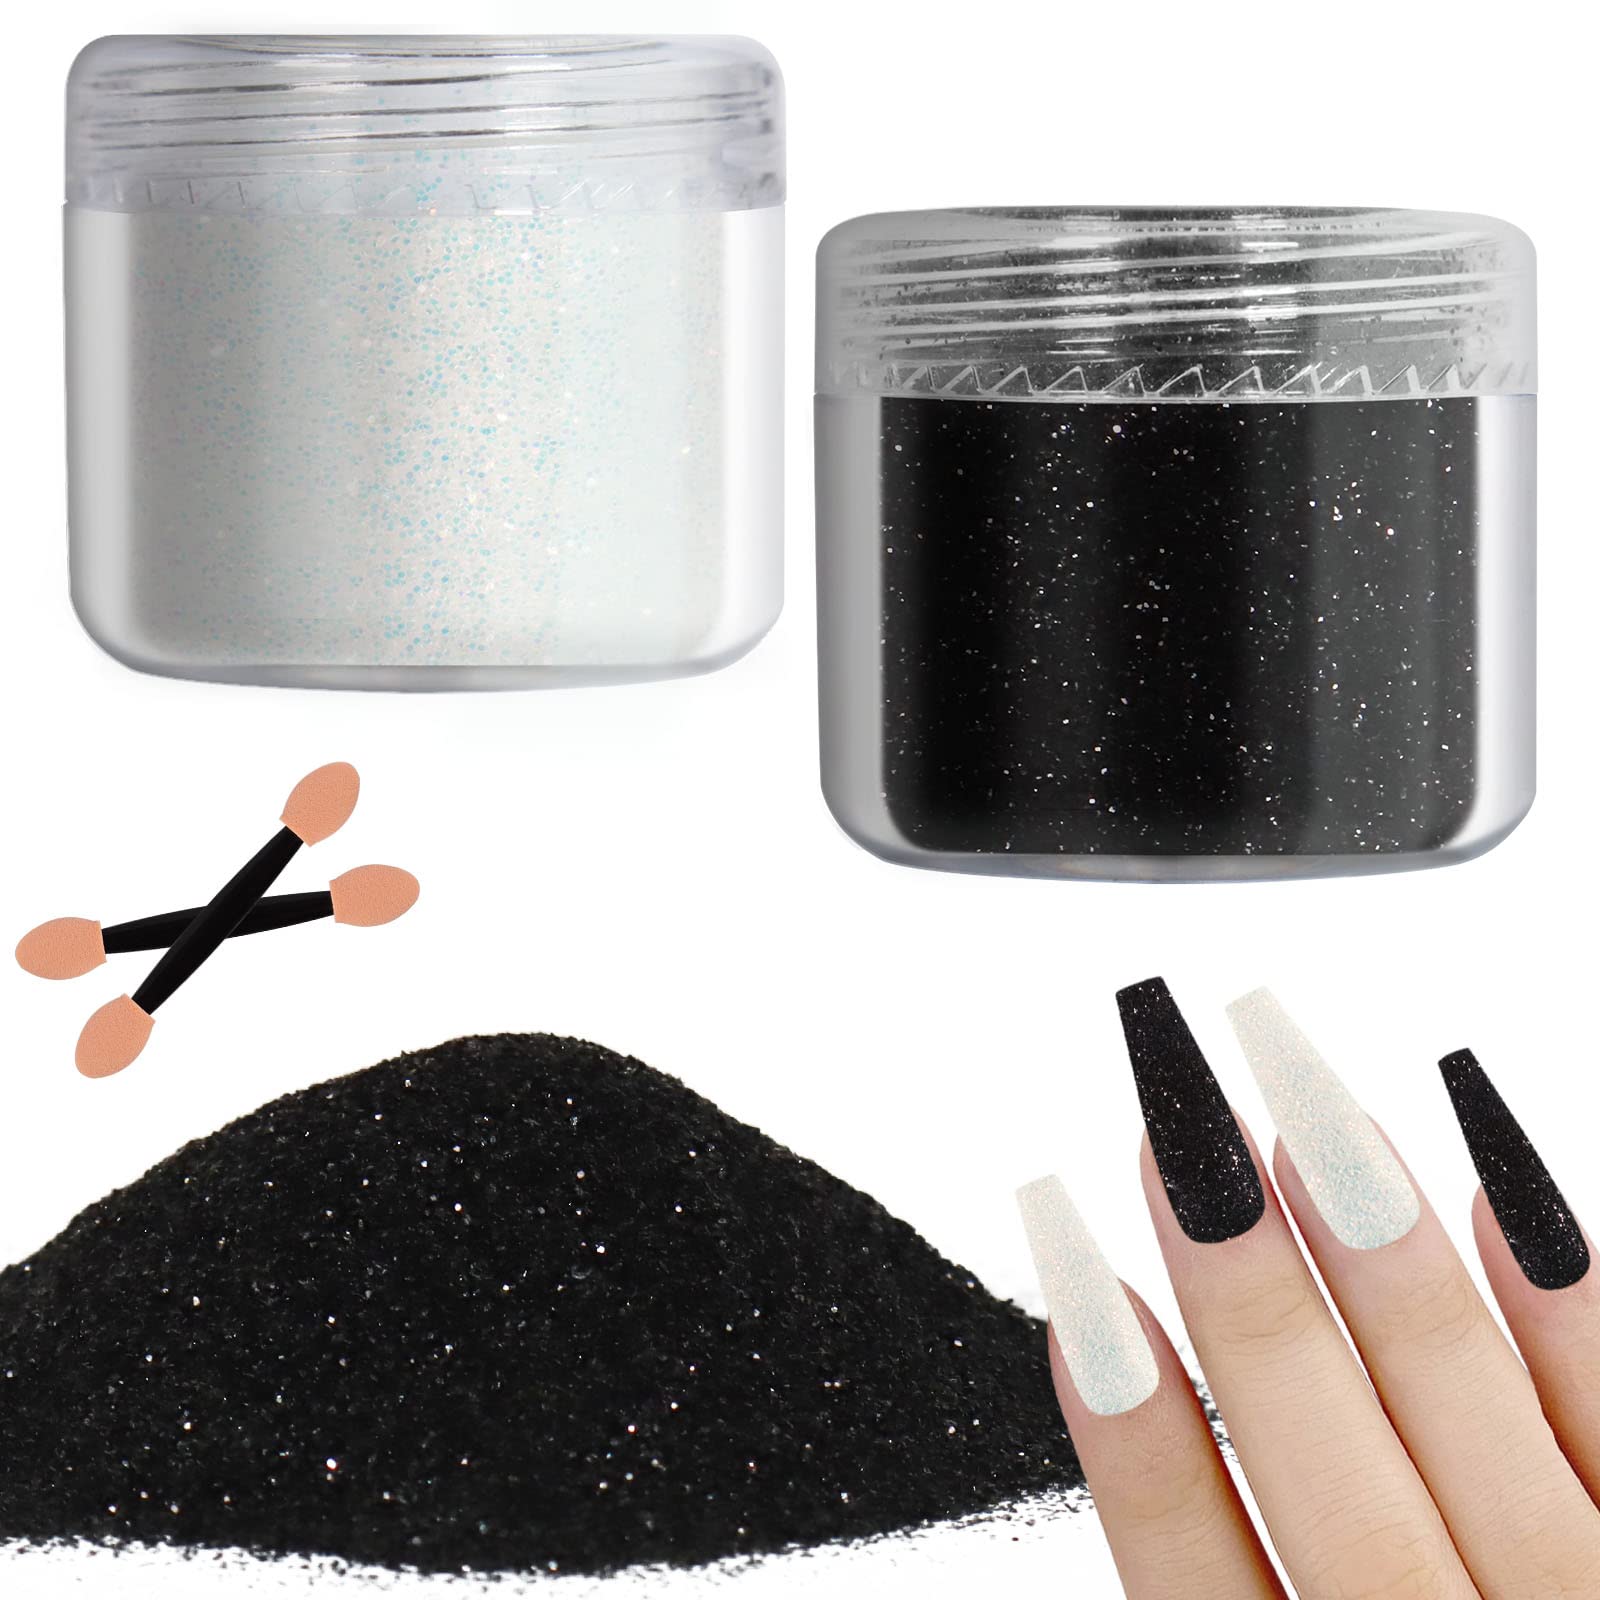 10g/Bag Shining Sugar Nail Glitter Transparent White Coating Effect Powder  Colorful Dust For Nail Art Decorations Accessories